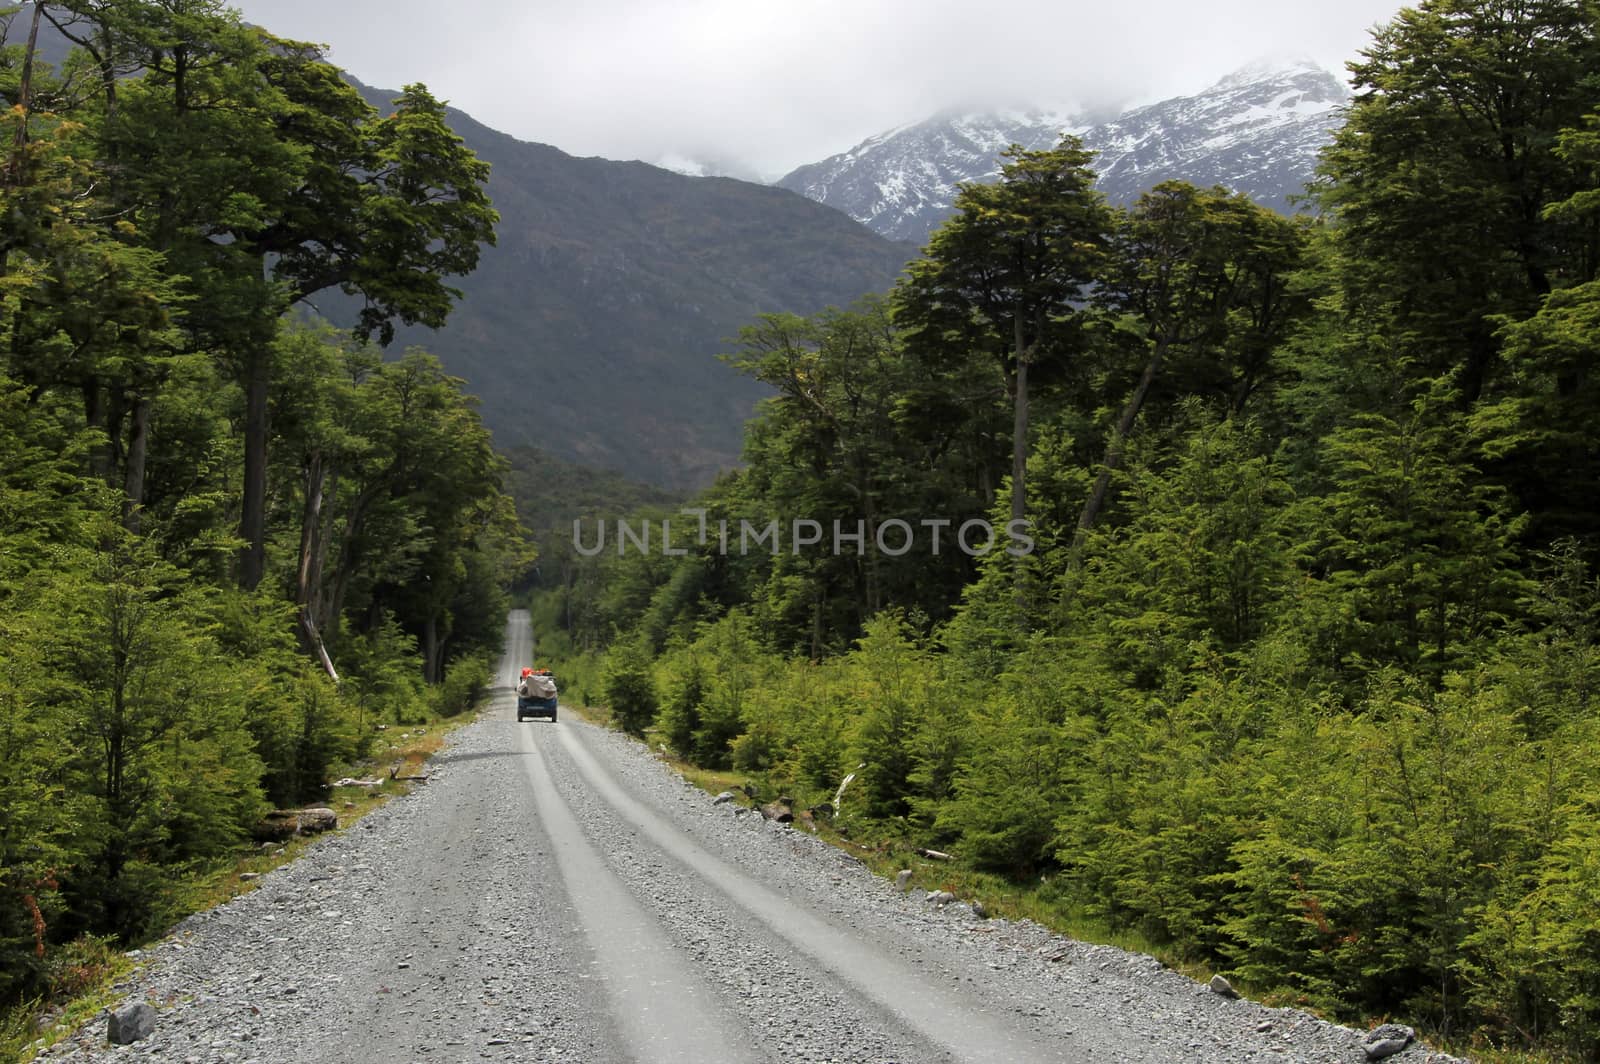 Van driving on Carretera Austral, on the way to Villa O'Higgins, Patagonia, Chile